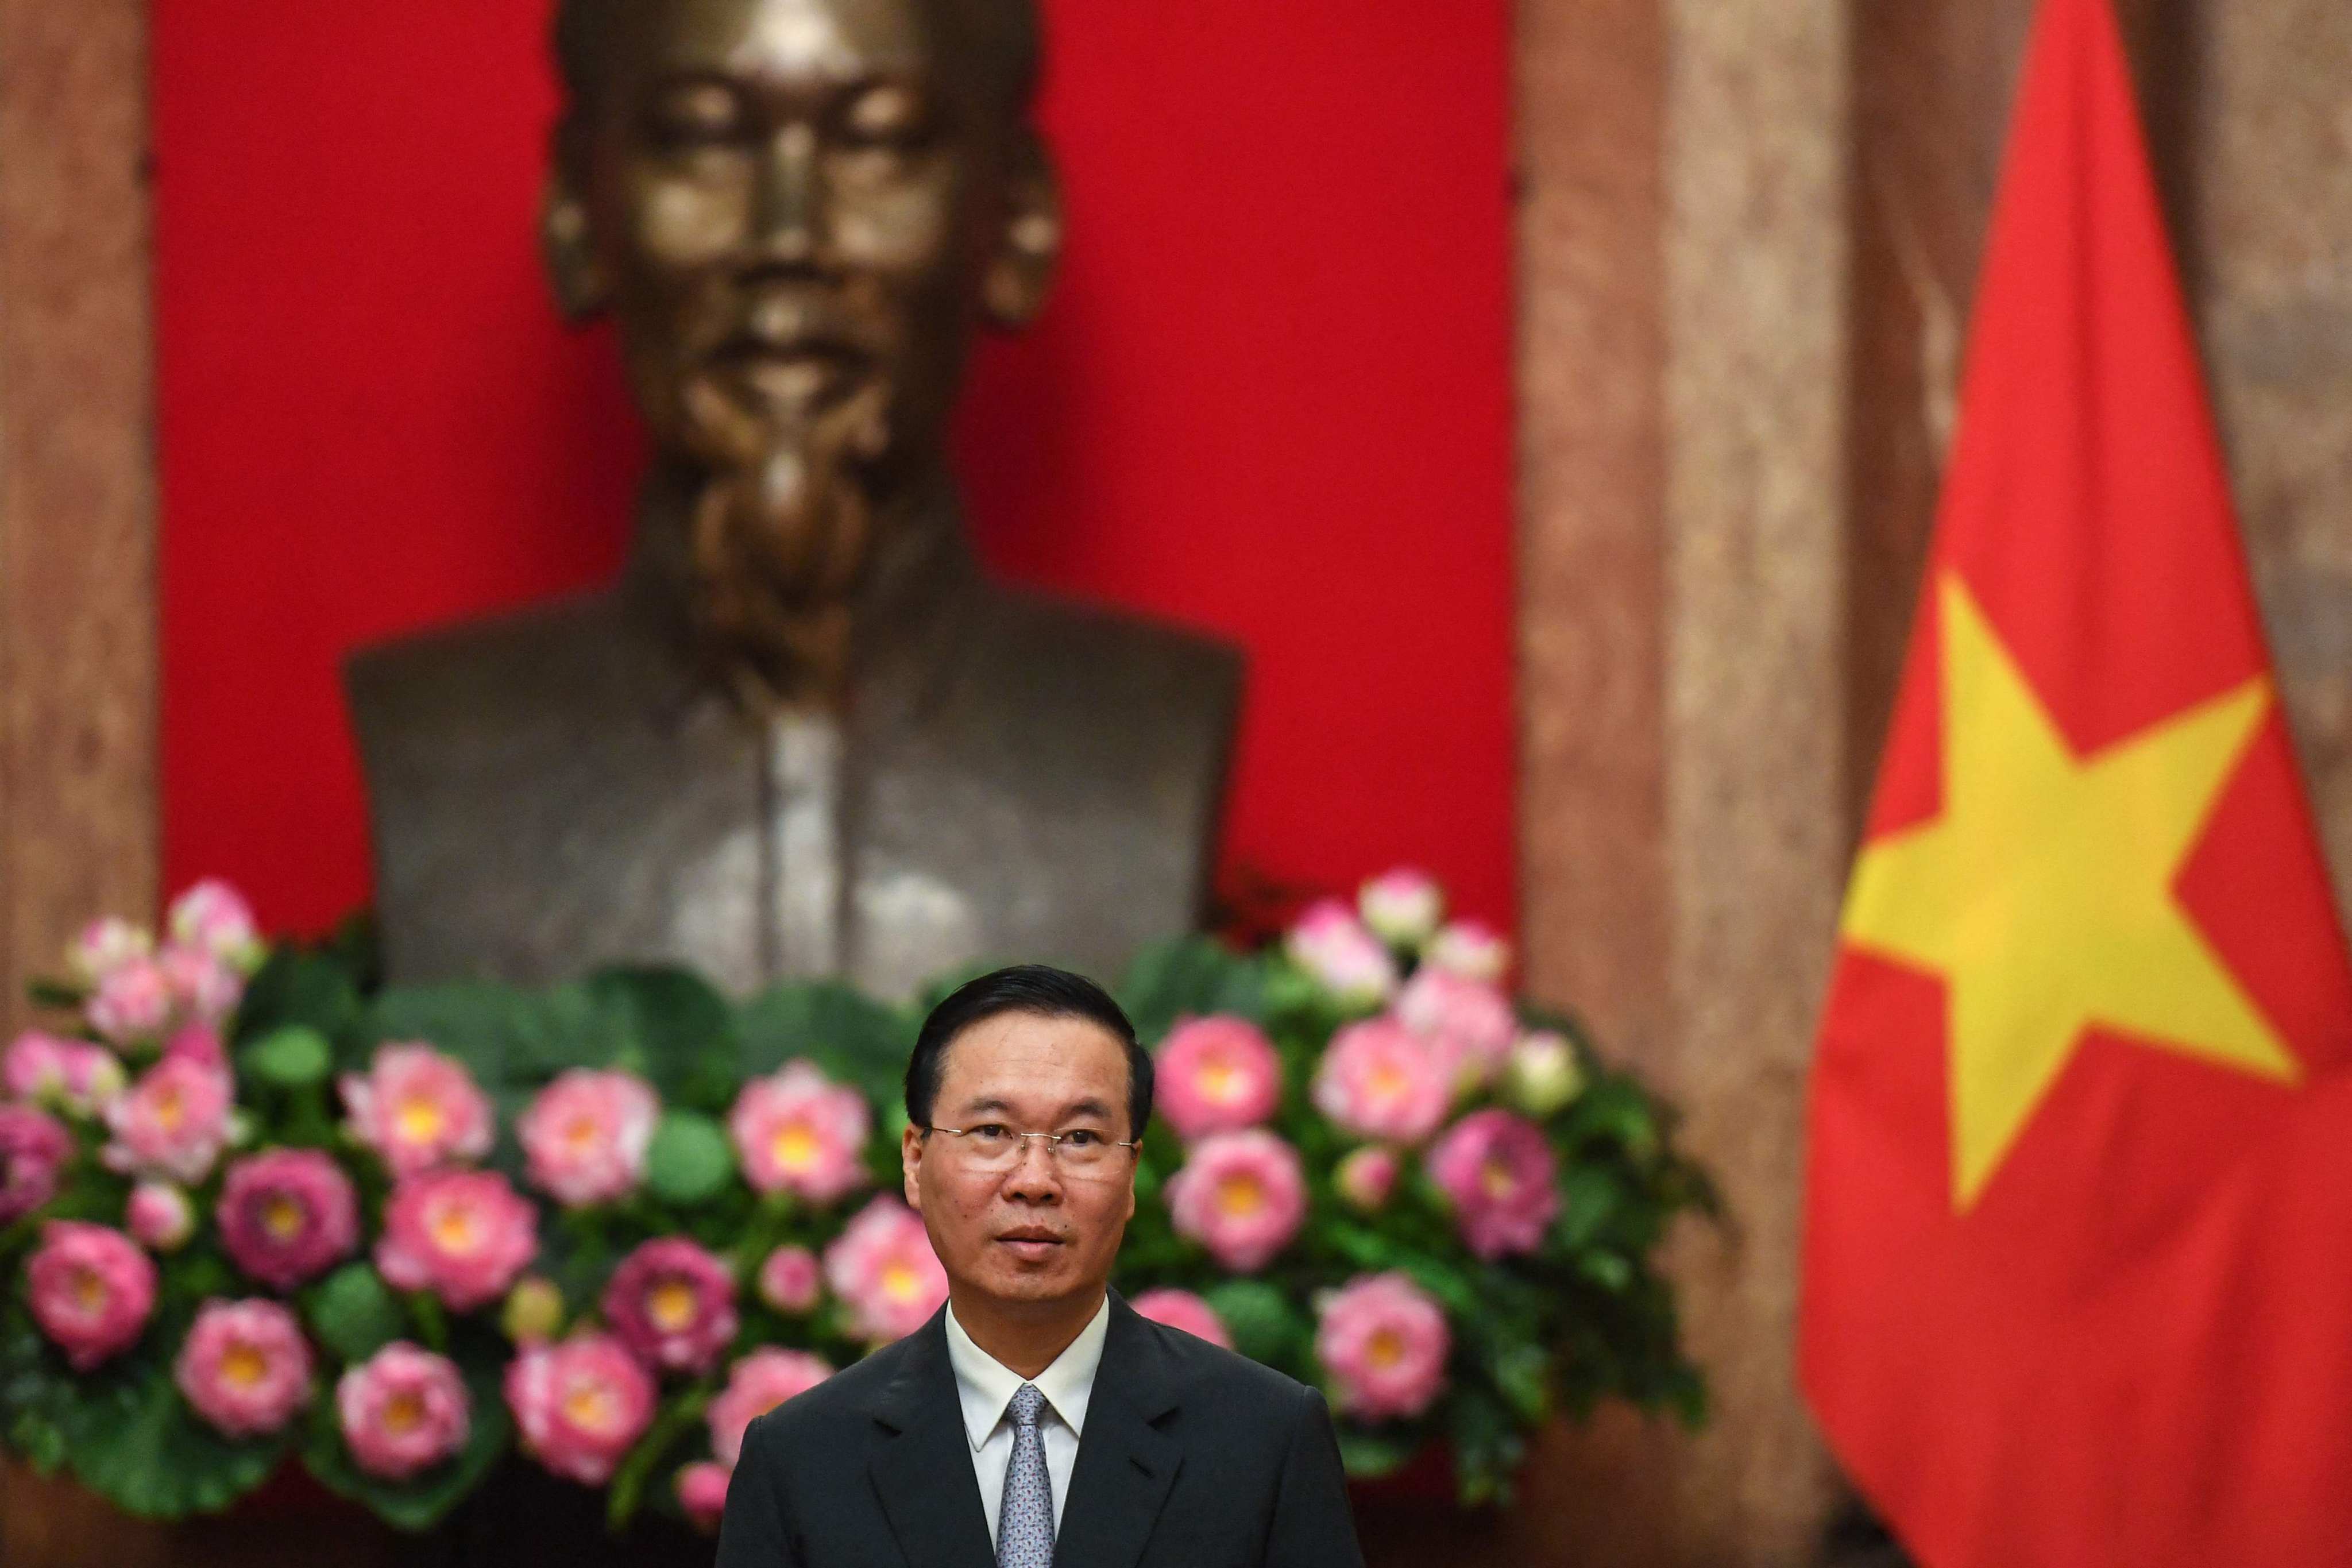 Vietnam’s President Vo Van Thuong looks on at the Presidential Palace in Hanoi. The Vietnamese Communist Party on Wednesday accepted the resignation of President Vo Van Thuong, the government said in a statement citing “shortcomings”. Photo: AFP